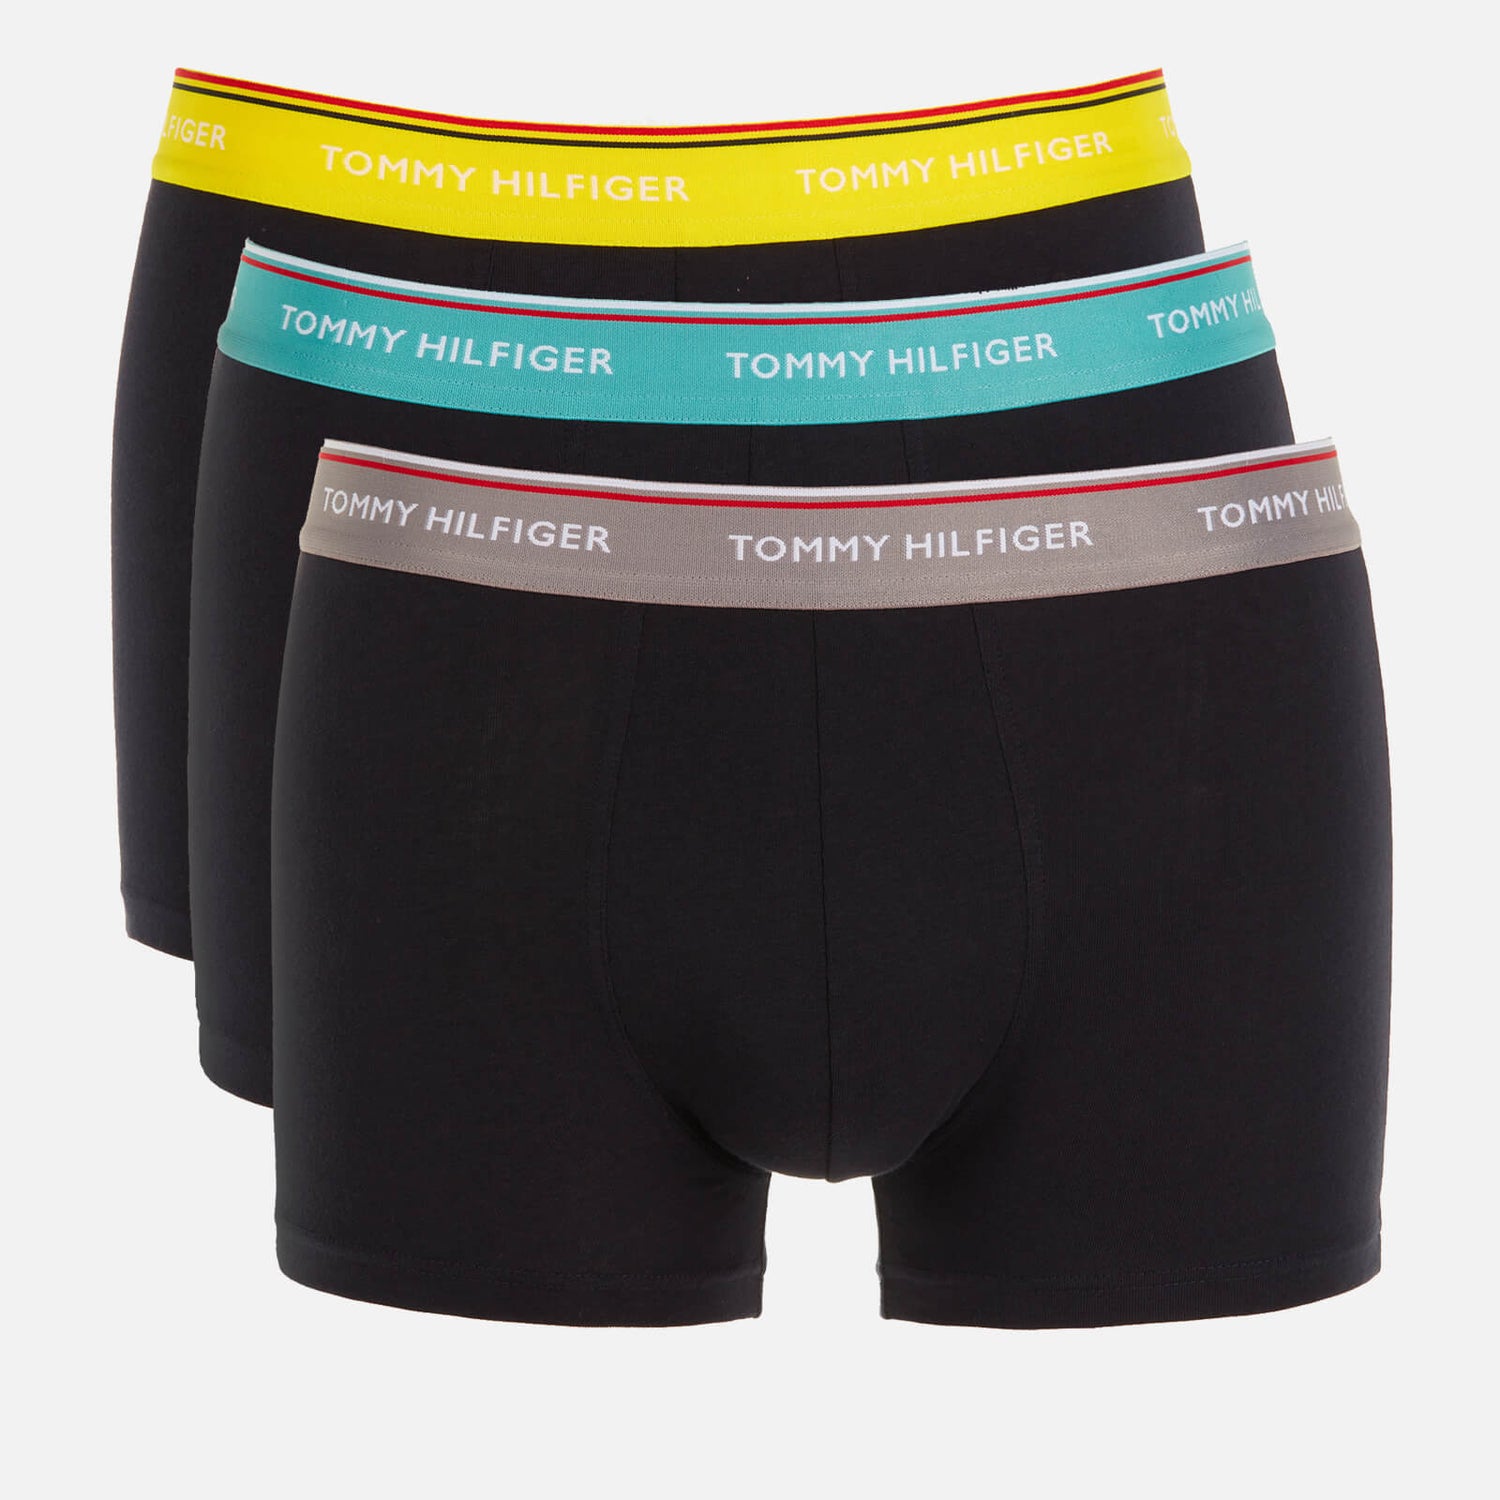 Tommy Hilfiger Men's 3 Pack Trunks with Contrast Waistband - TH Yellow/Sublunar/Teal